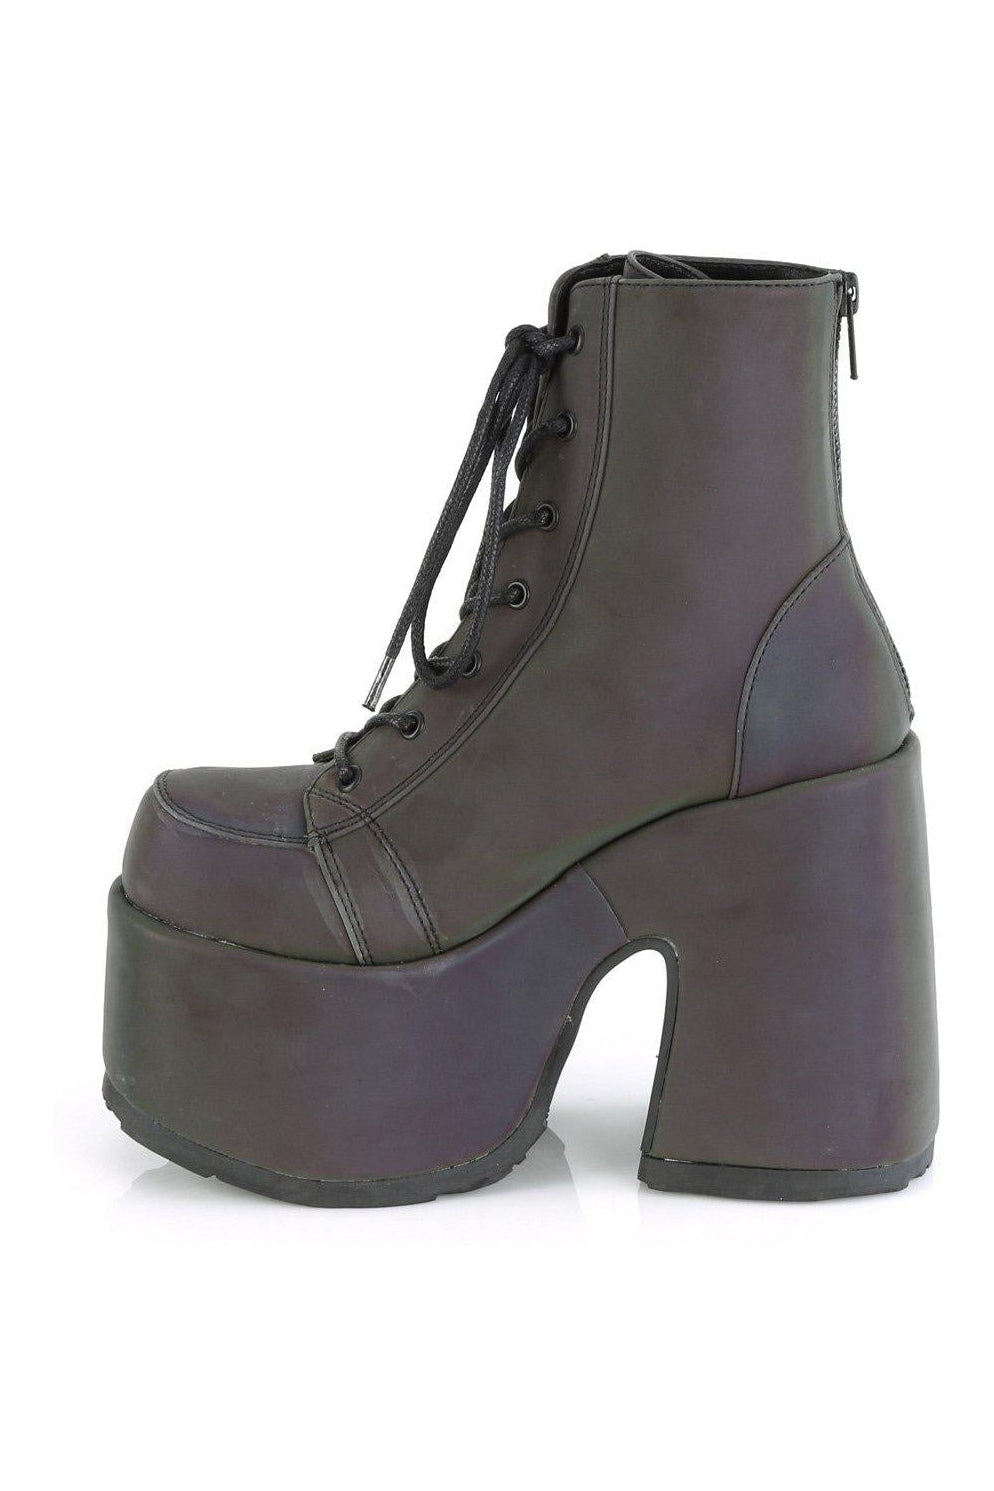 CAMEL-203 Ankle Boot | Green Faux Leather-Ankle Boots-Demonia-SEXYSHOES.COM